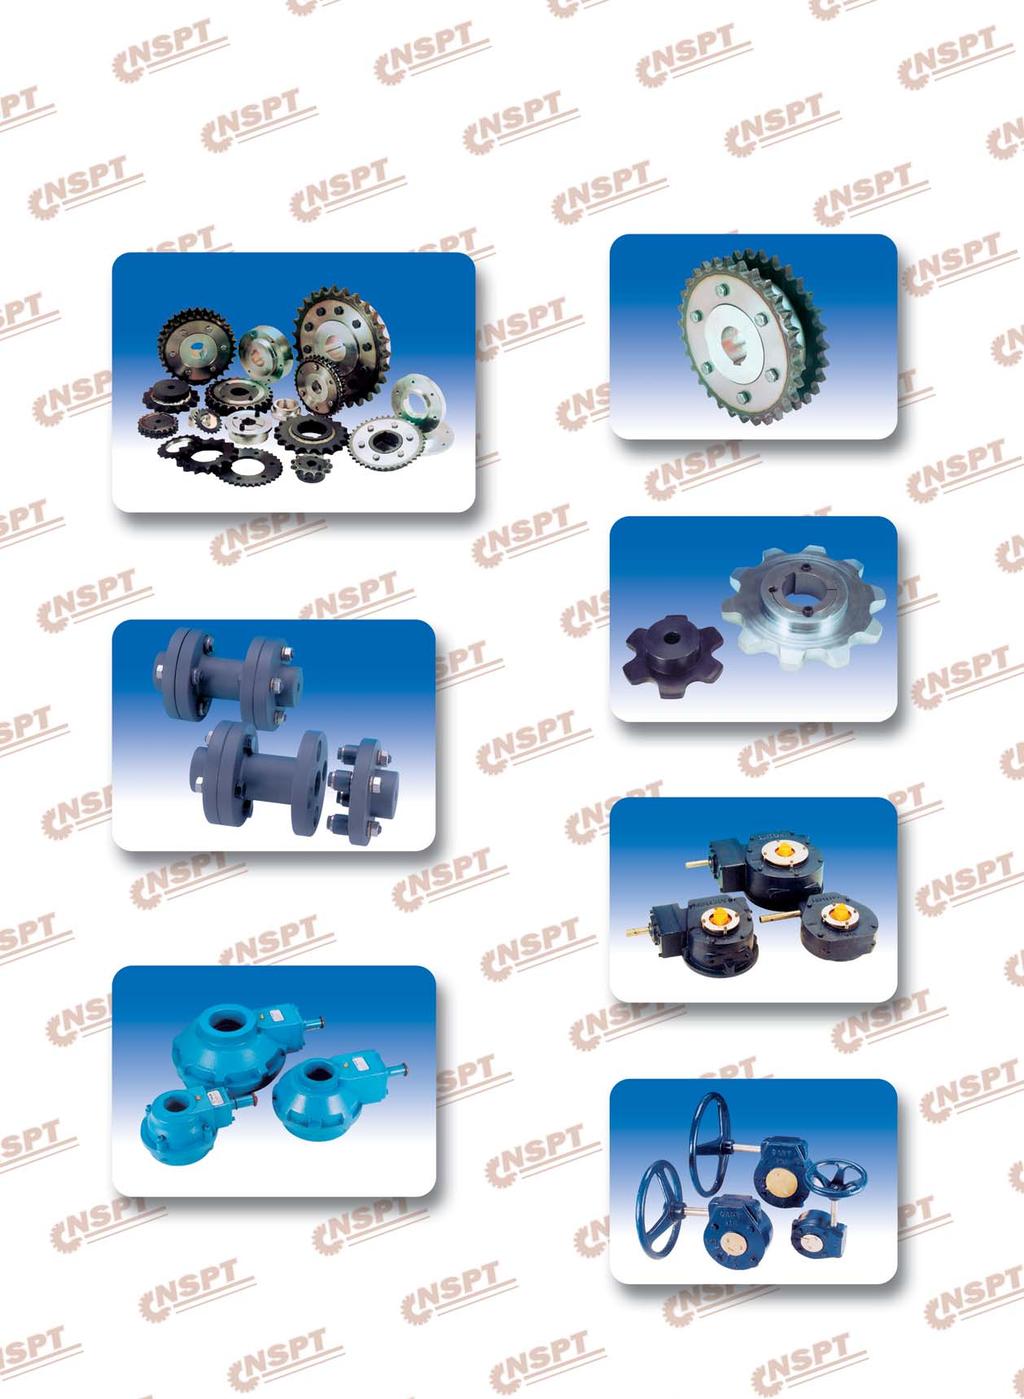 Transferable Sprockets Transferable Sprockets and Weld-on Hubs Flame Cut Sprockets Flange Type Quick